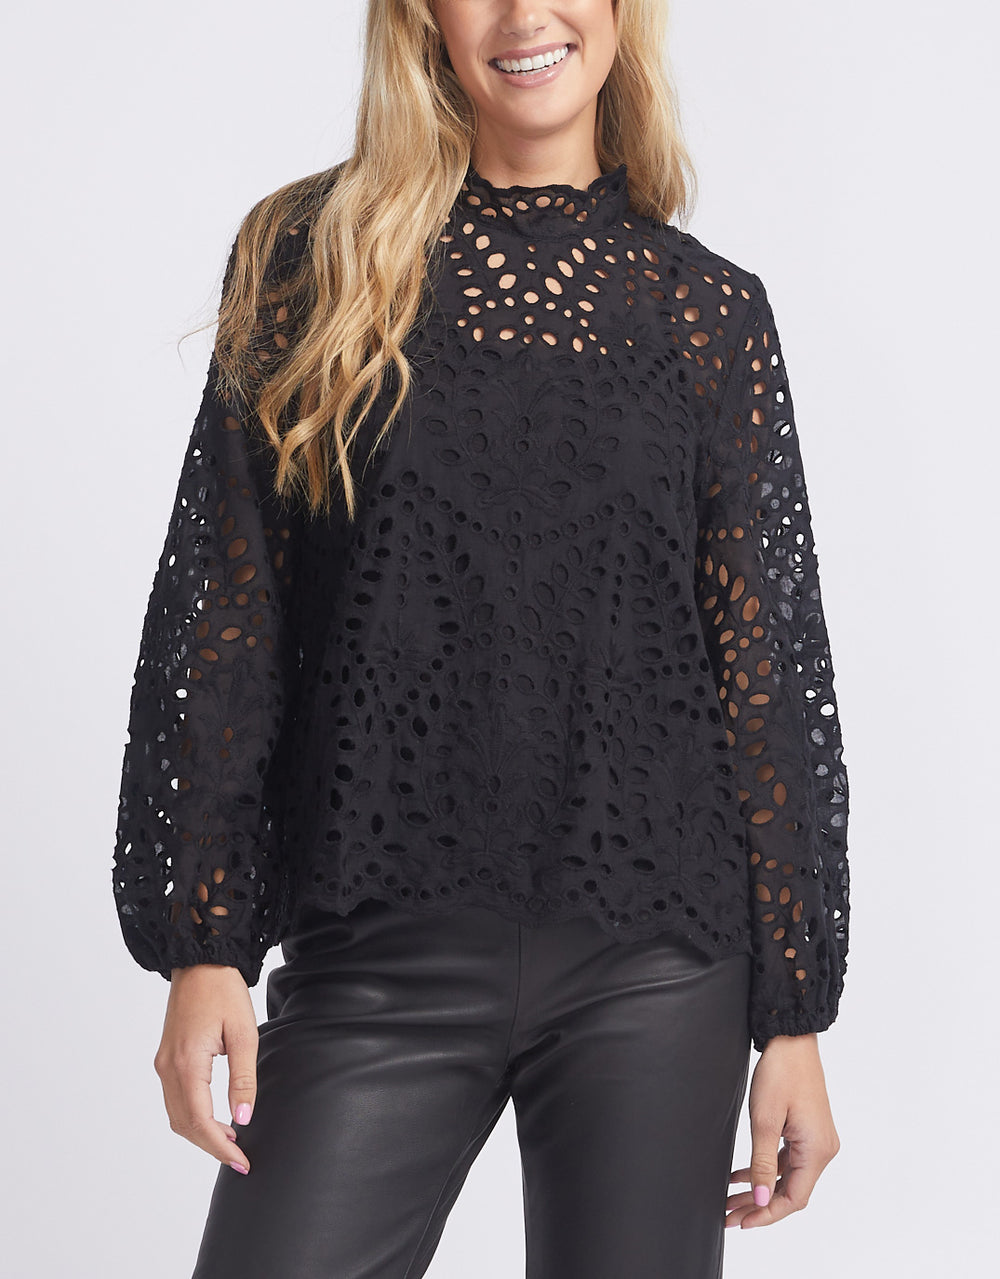 fate-becker-hopelessly-devoted-lace-cutout-top-black-womens-clothing